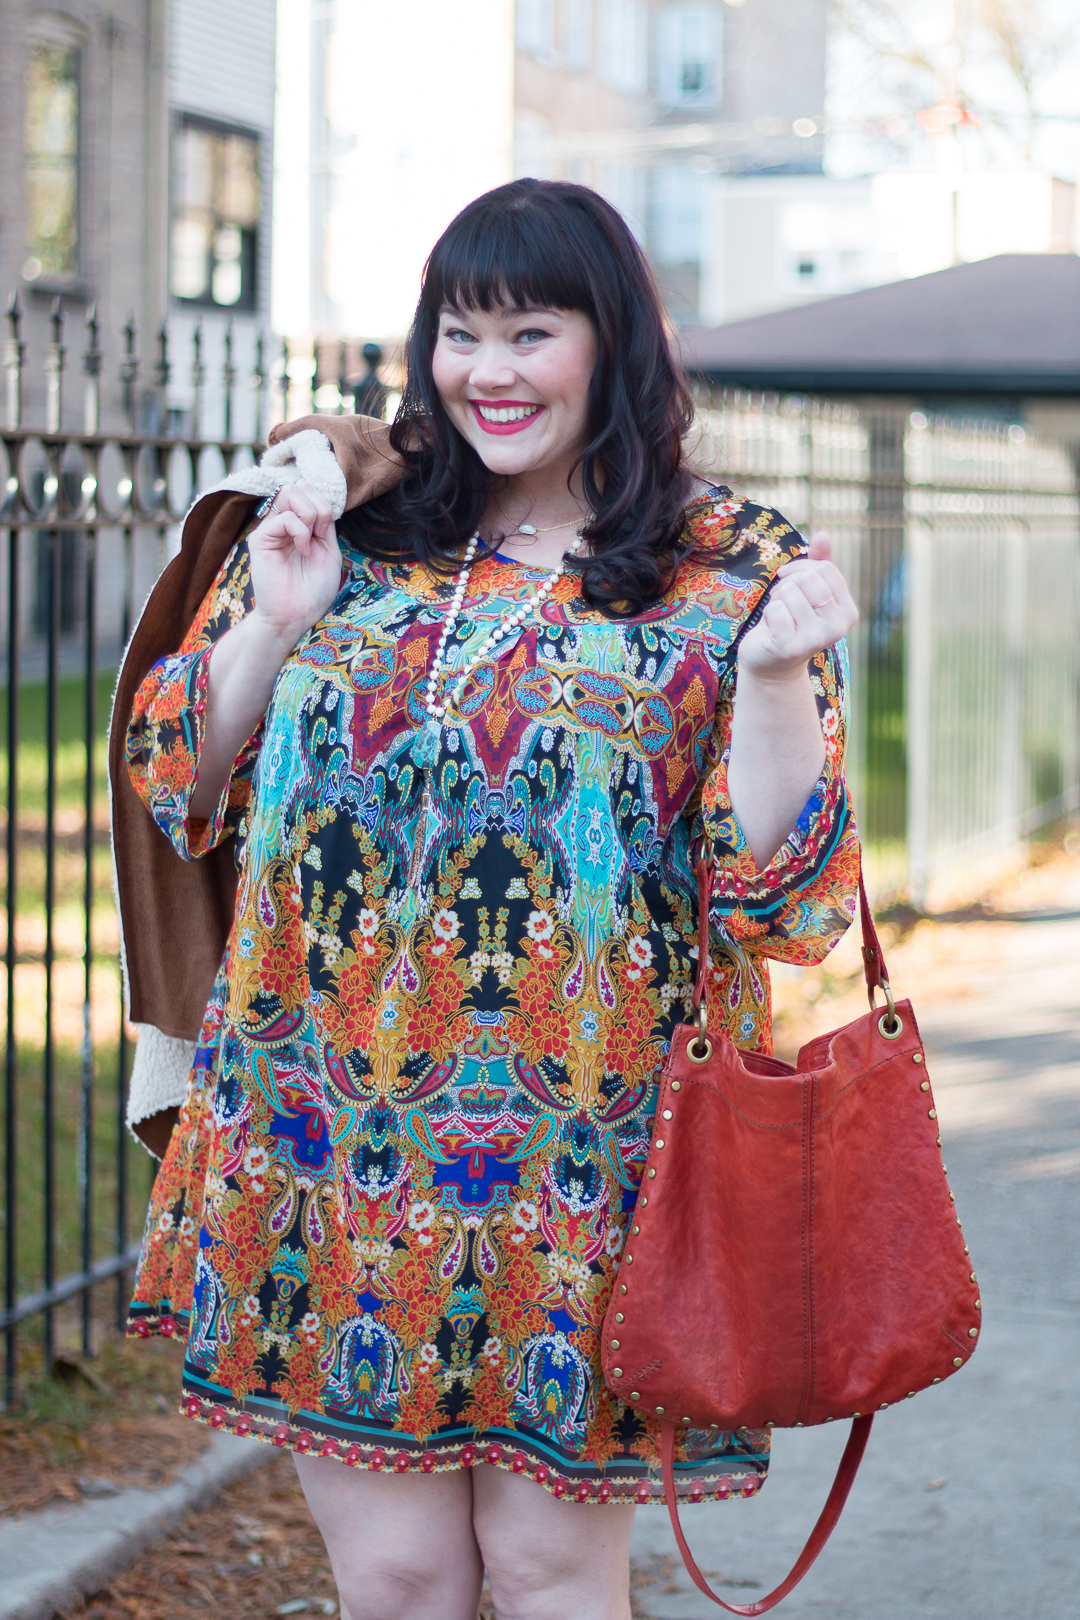 Just My Size Plus Size Dresses, Paisley, Plus Size Style, Plus Size Fashion, Style Plus Curves, Chicago Blogger, Chicago Plus Size Blogger, Plus Size Blogger, Amber McCulloch